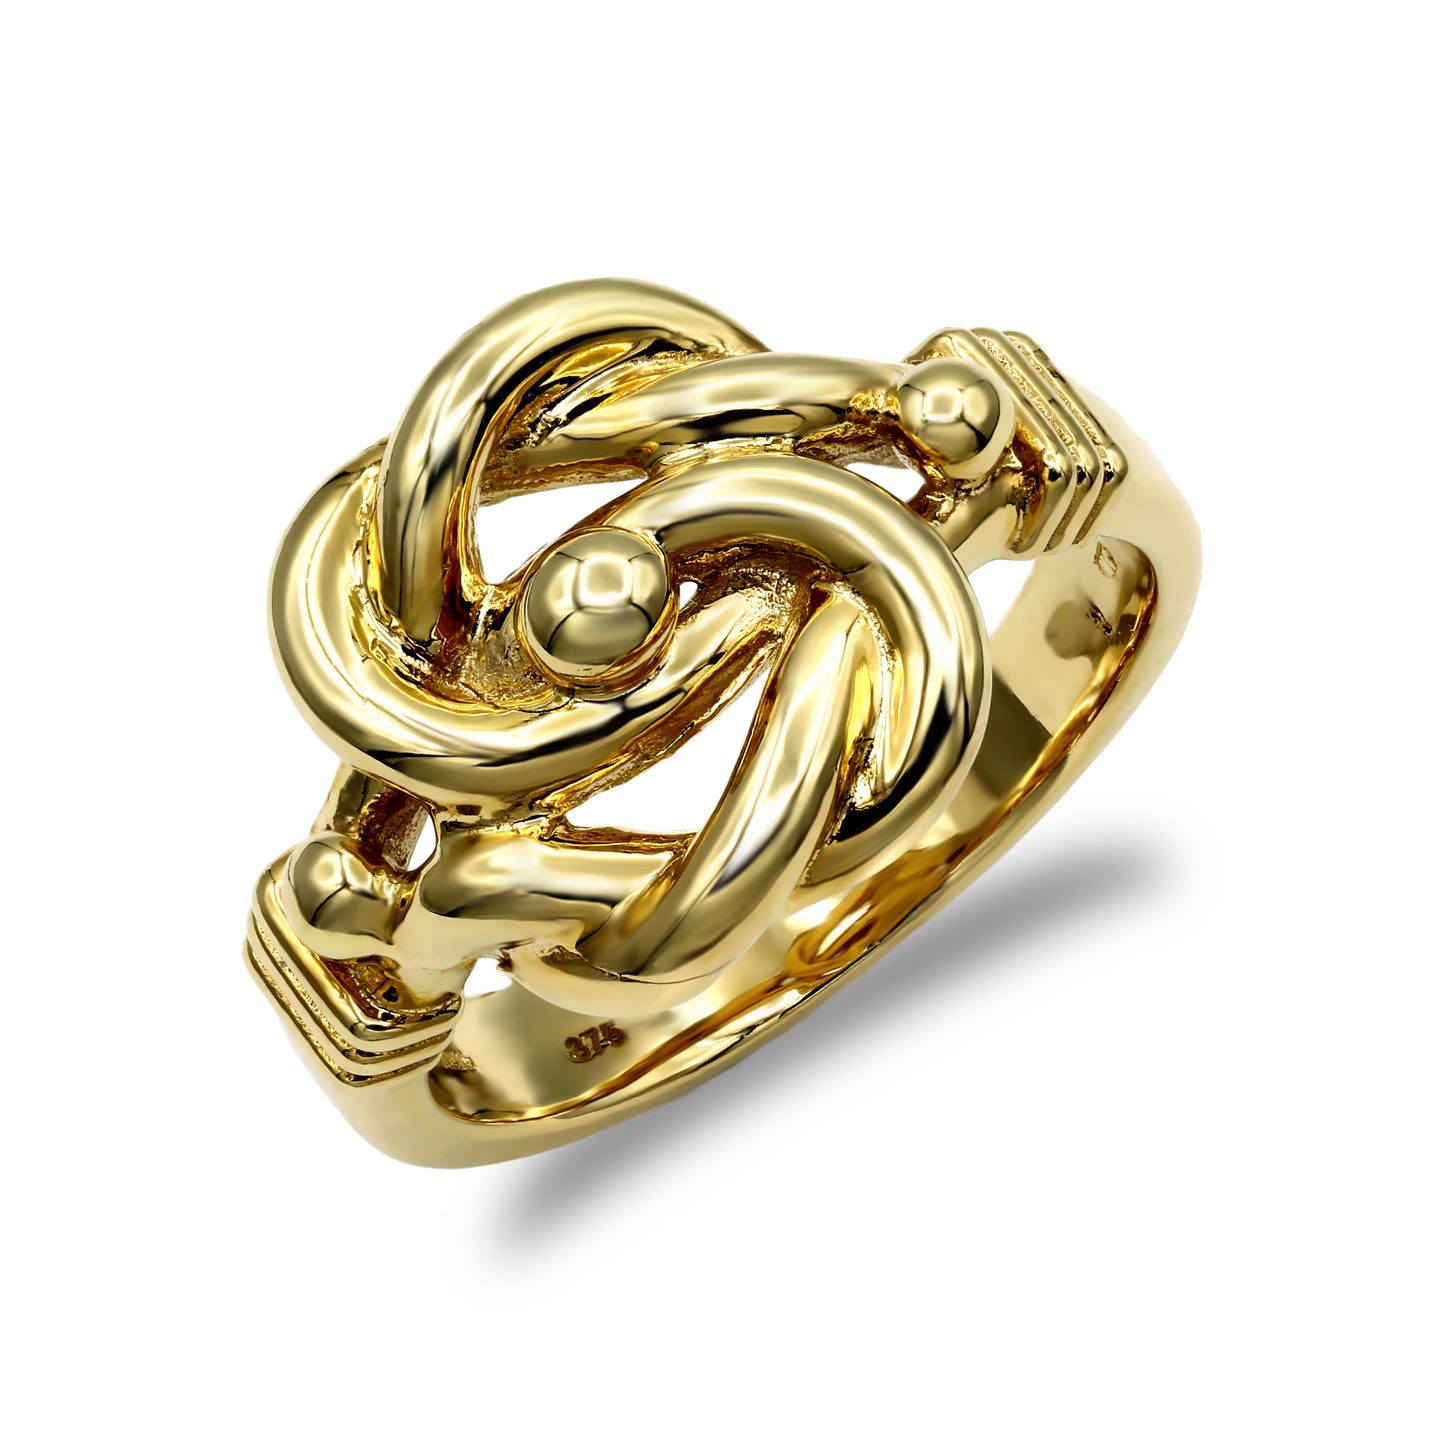 Mens Solid 9ct Gold  Double Knot Ring - JRN059